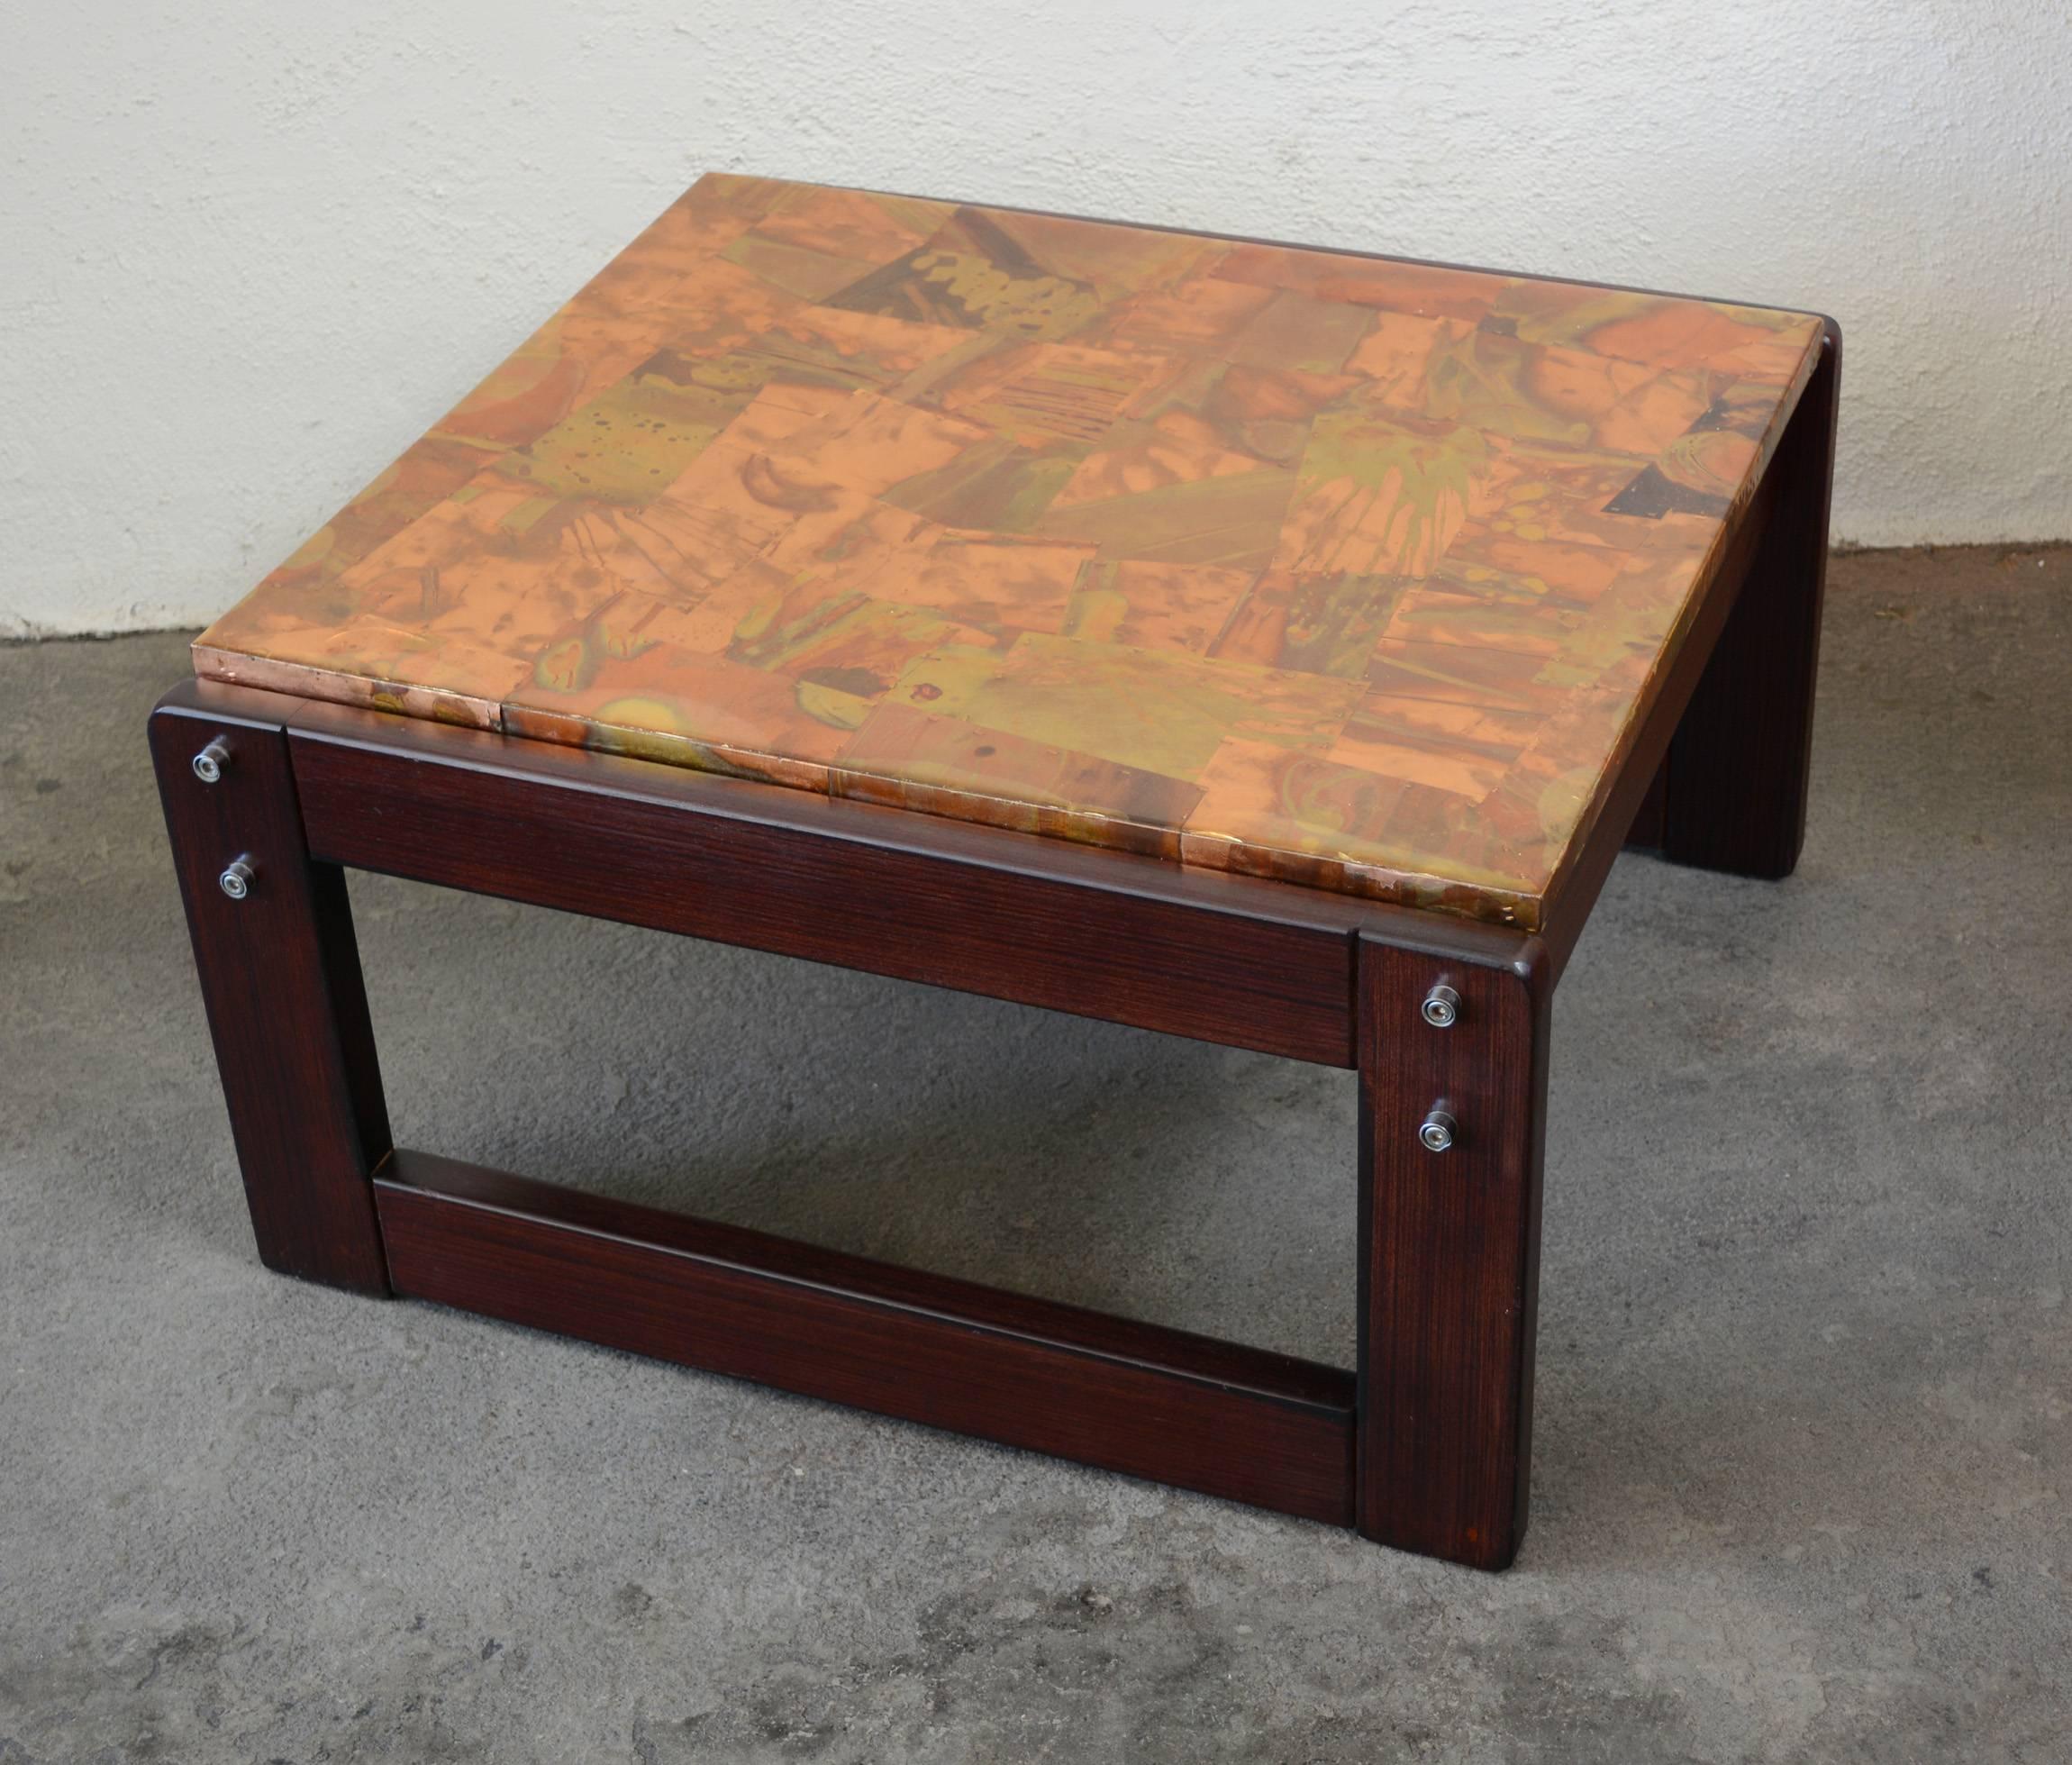 Brazilian Rosewood Table with Patchwork Copper Top by Percival Lafer